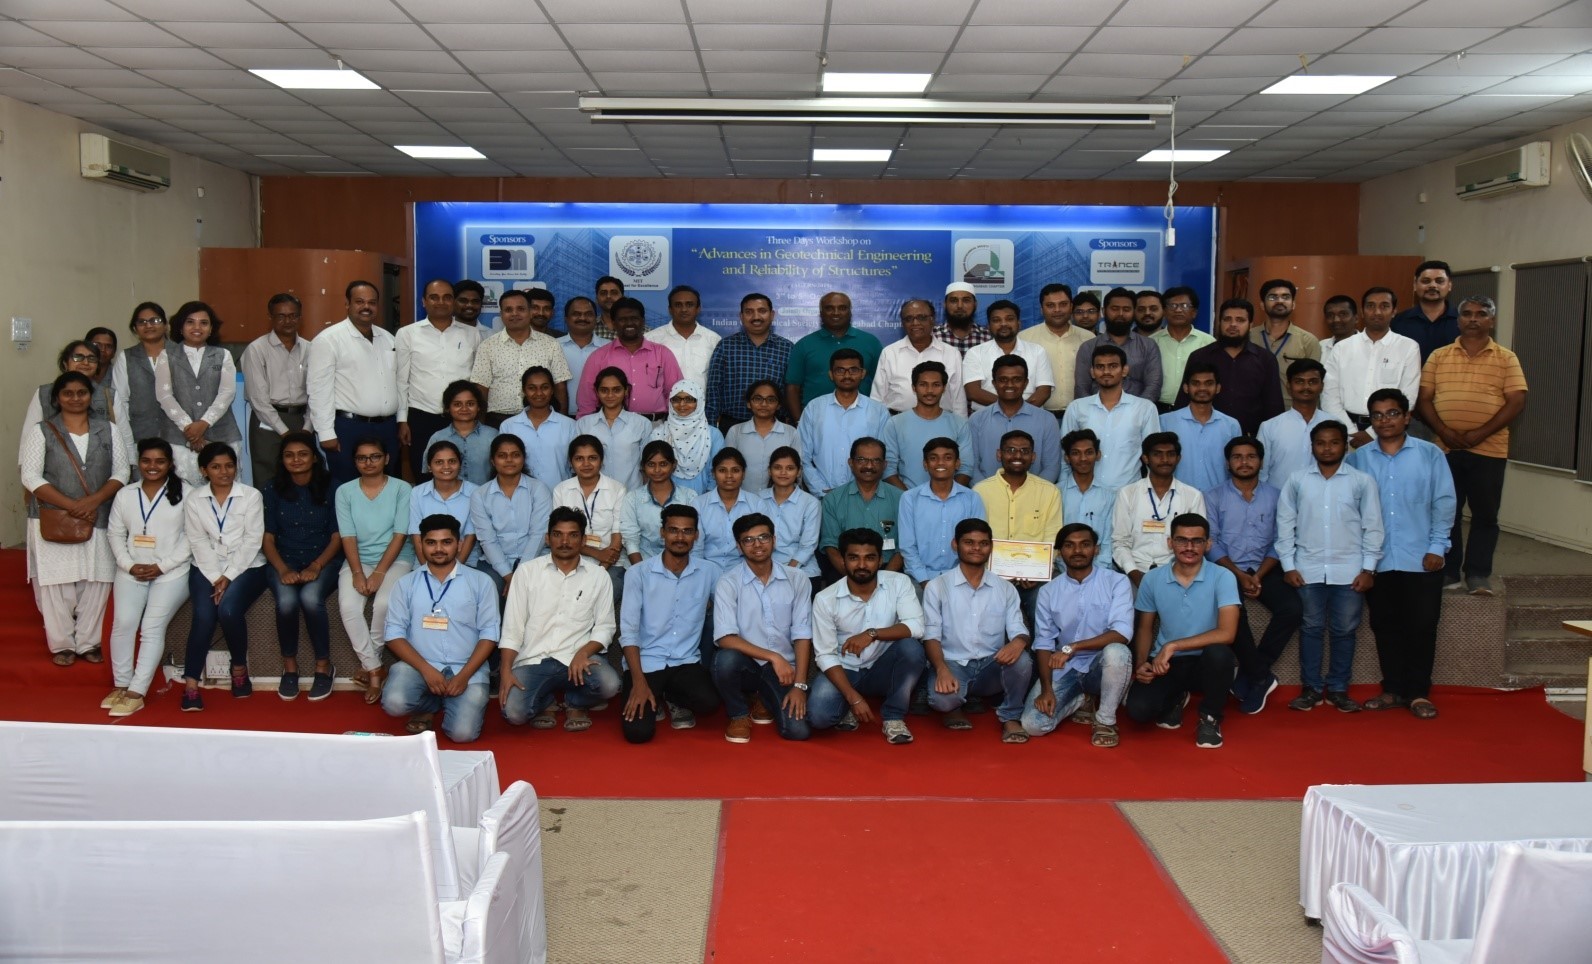 Three days’ workshop  On  “Advances in Geotechnical Engineering and reliability of structures” Organized by IGS Aurangabad Chapter